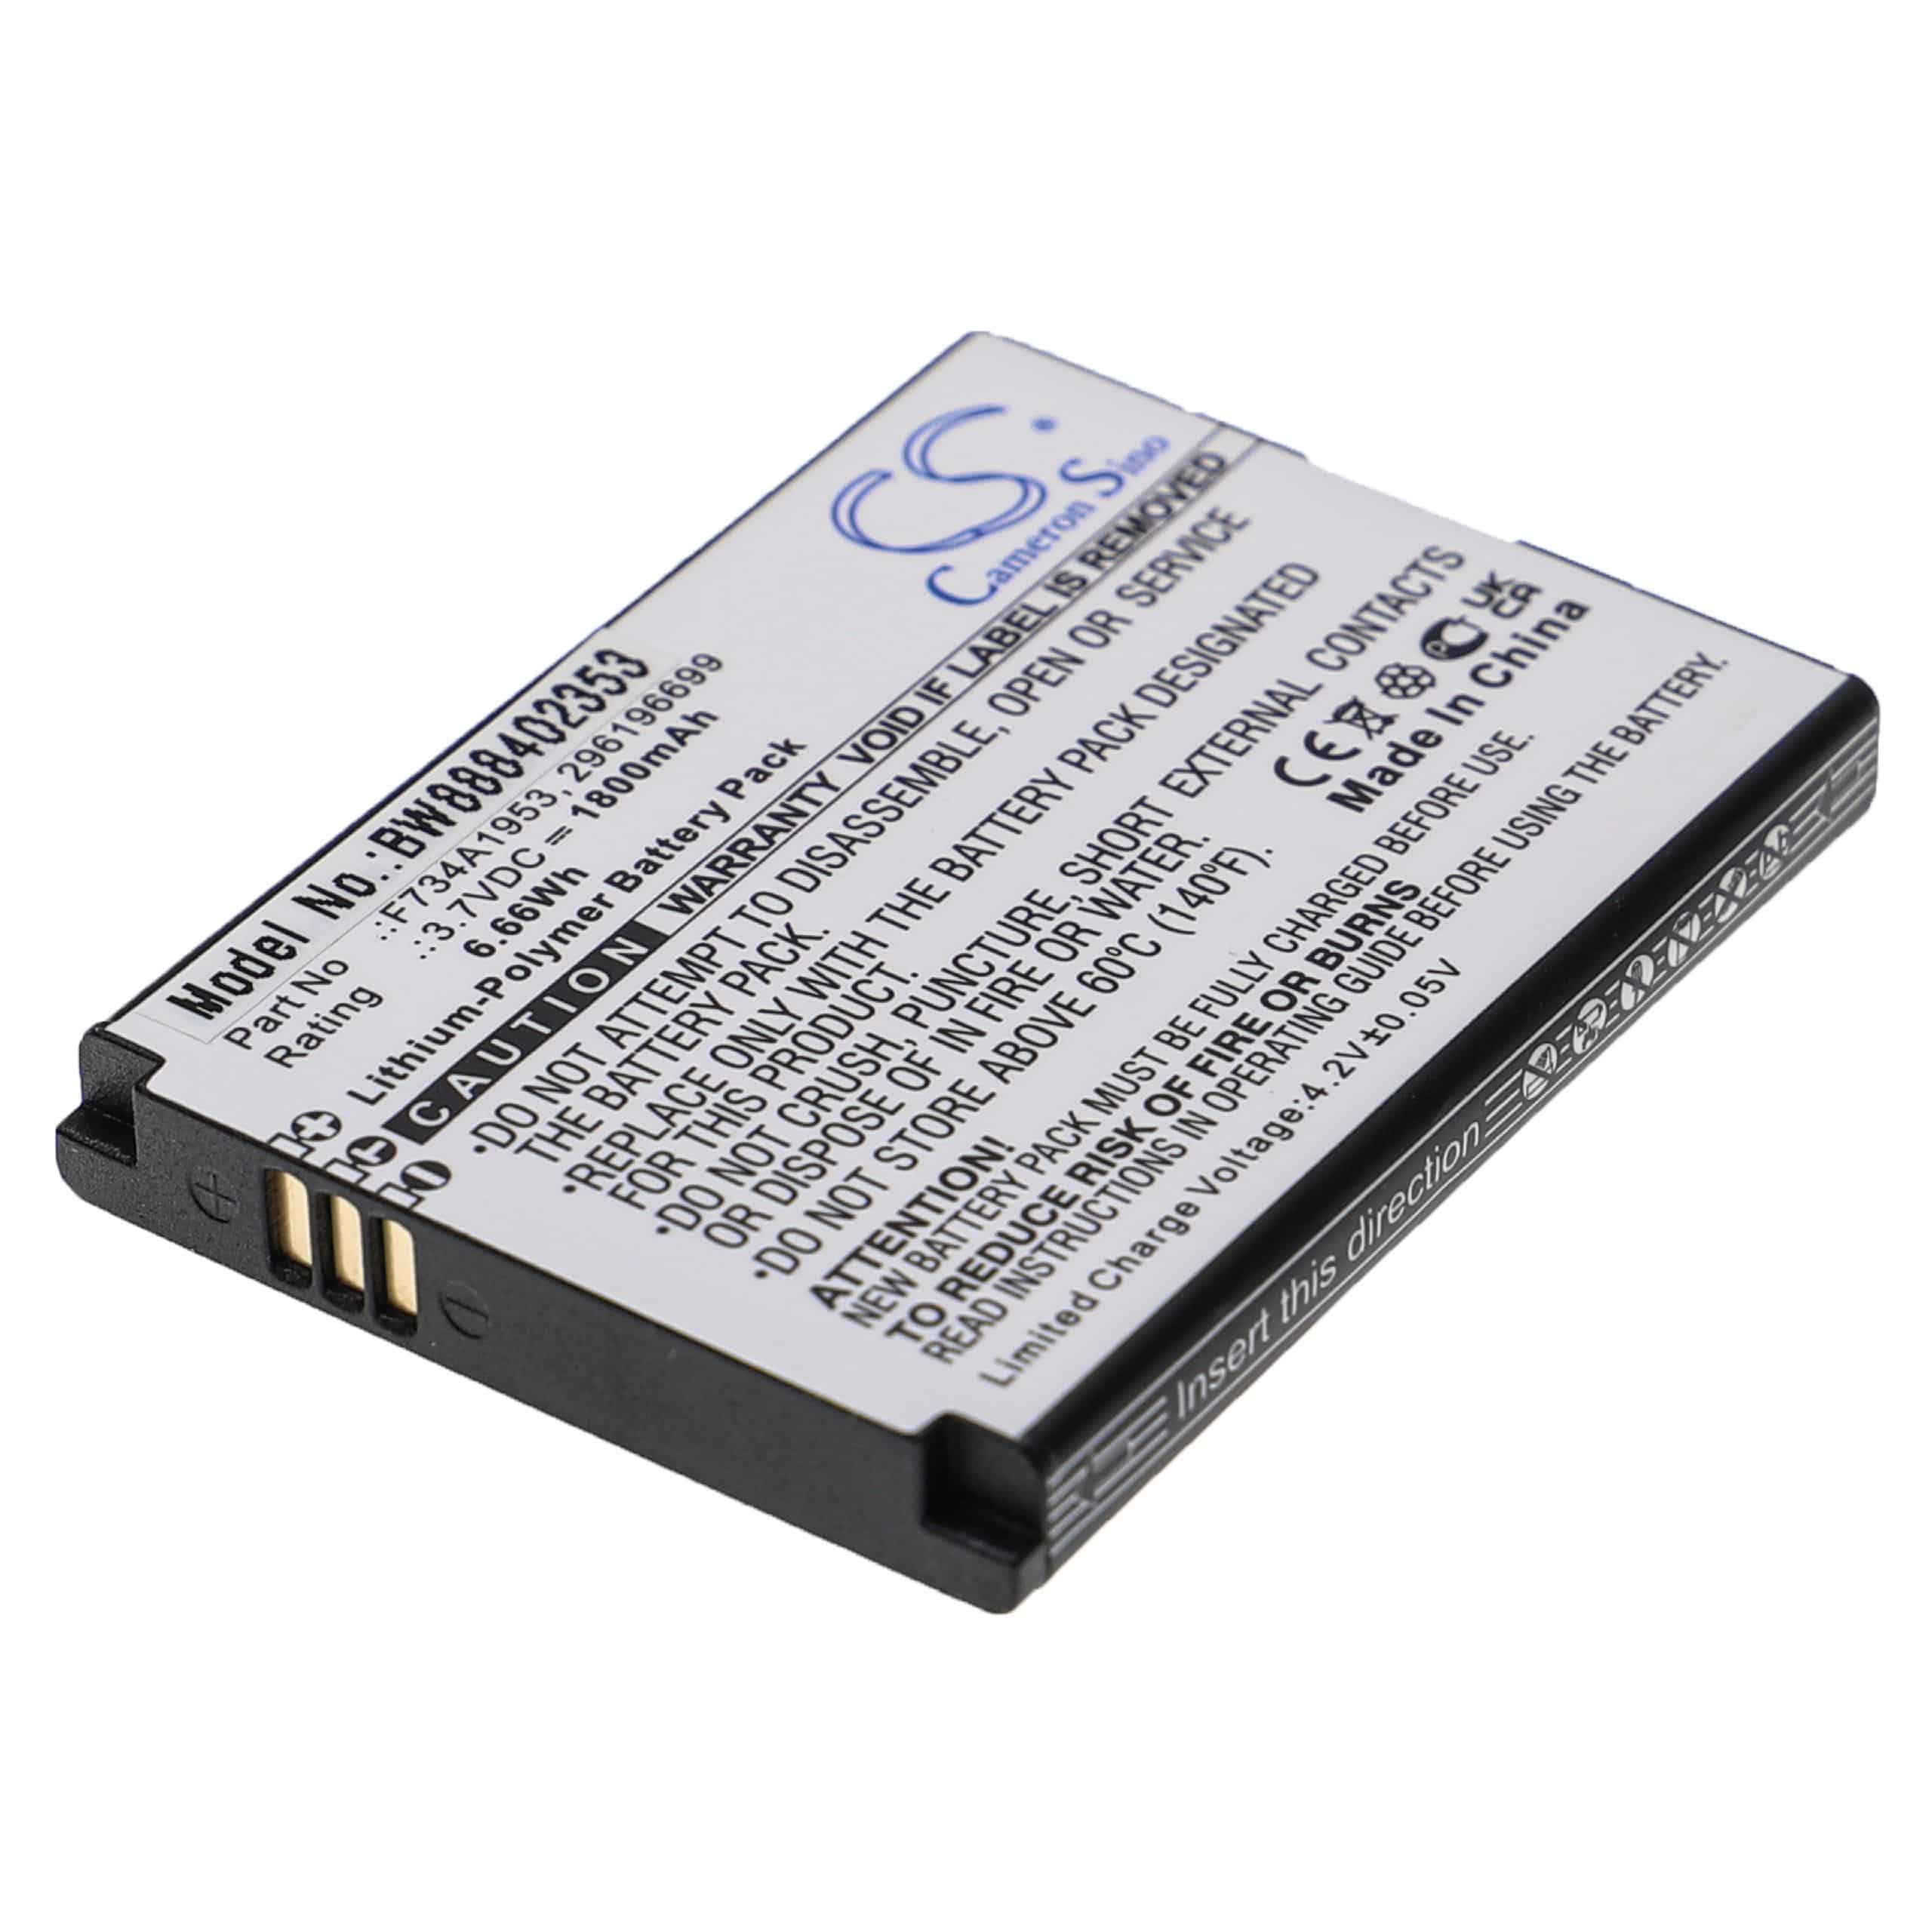 Card Reader Battery Replacement for Ingenico 296196699, F734A1953 - 1800mAh 3.7V Li-polymer